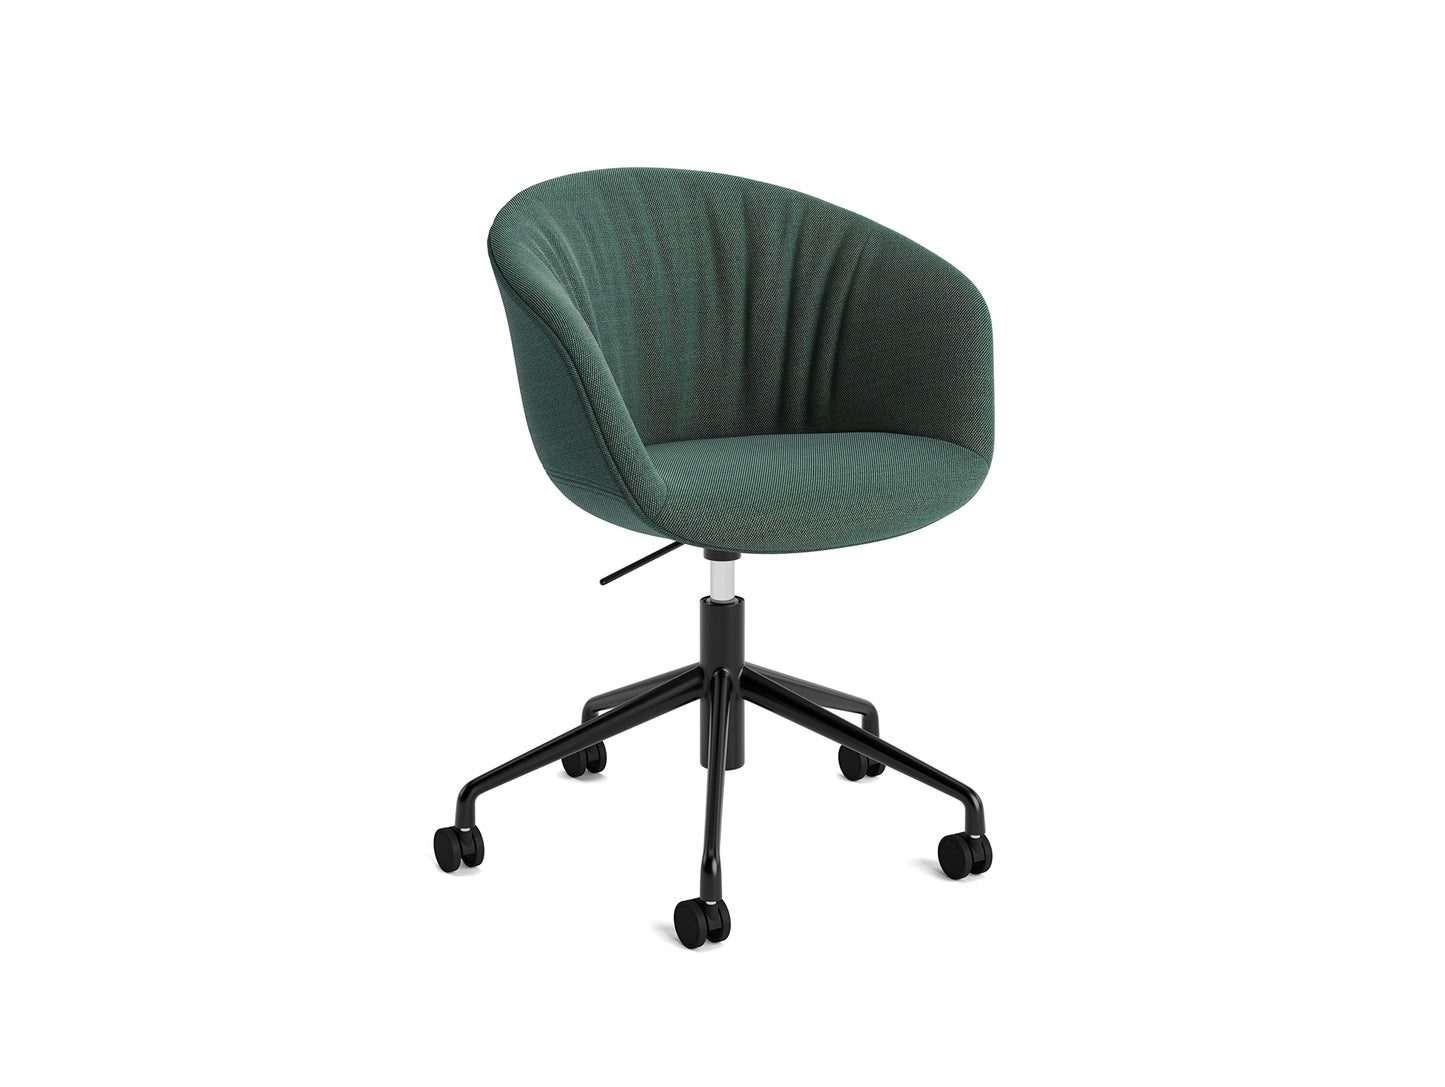 About A Chair AAC 53 Soft by HAY - Steelcut Trio 966 / Black Powder Coated Aluminium